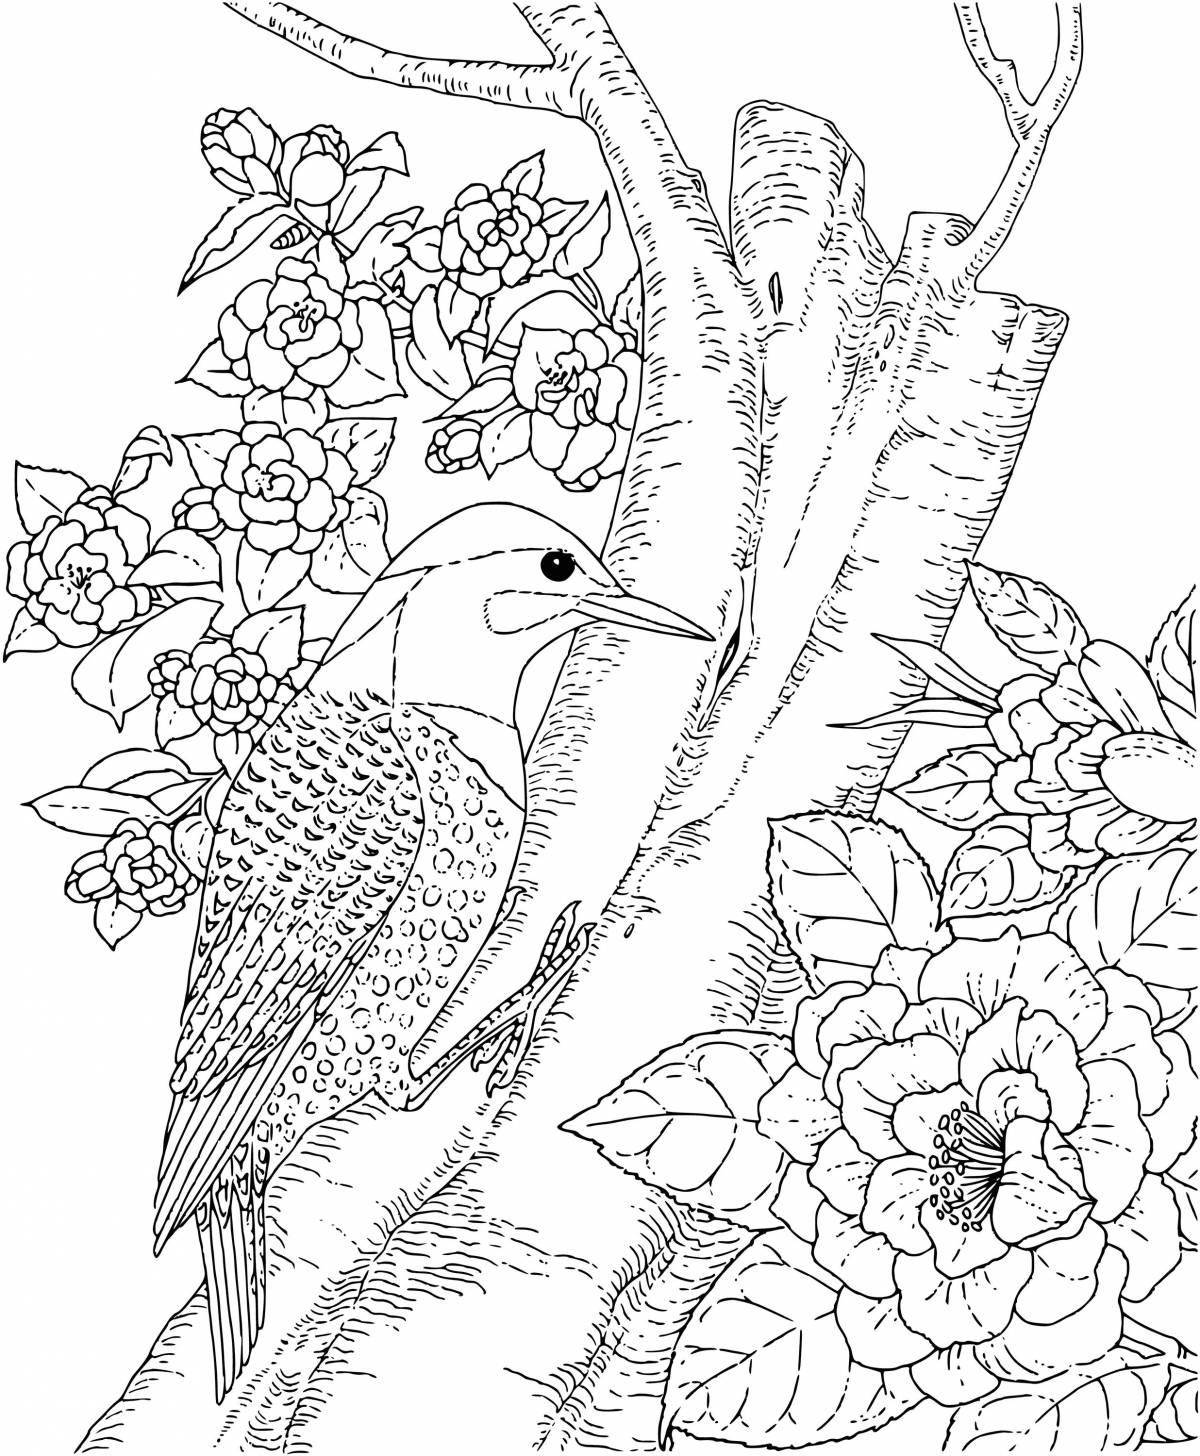 Amazing animal and bird coloring pages